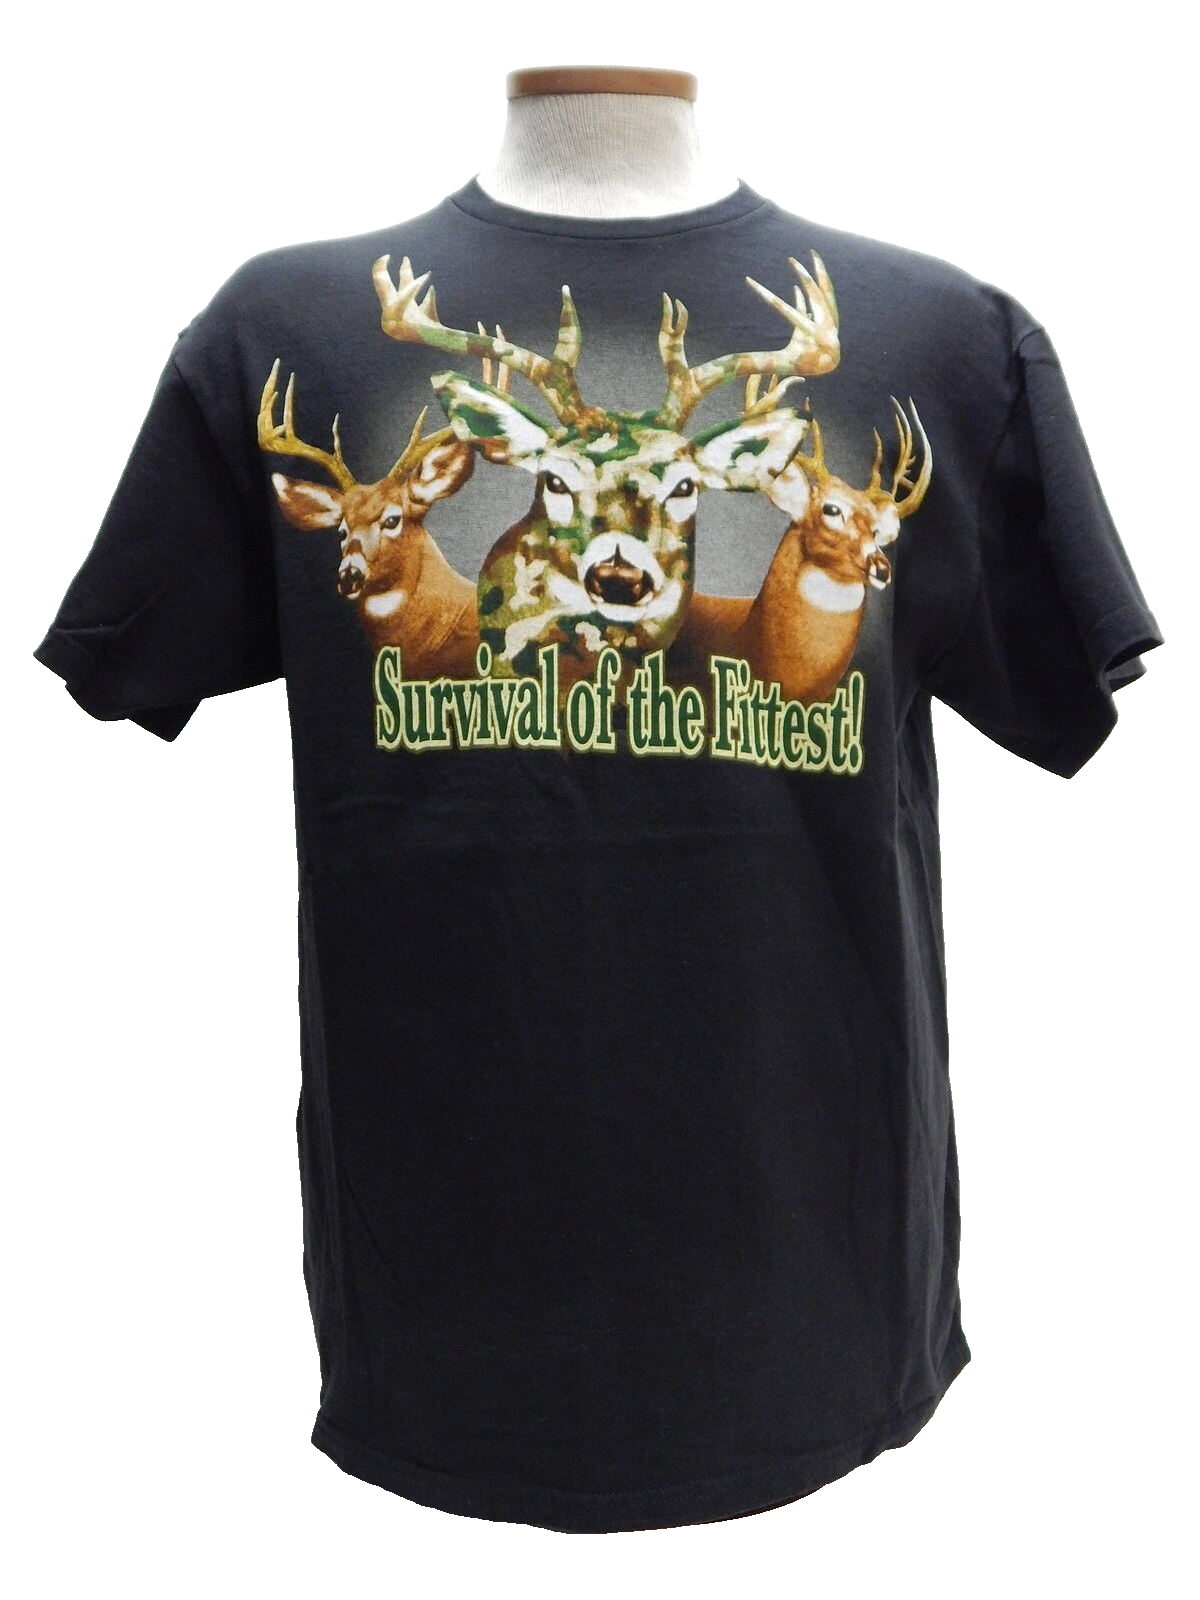 Survival Of The Fittest Camouflage Men's Deer S Hunting Black Cotton T-shirt NEW - $9.72